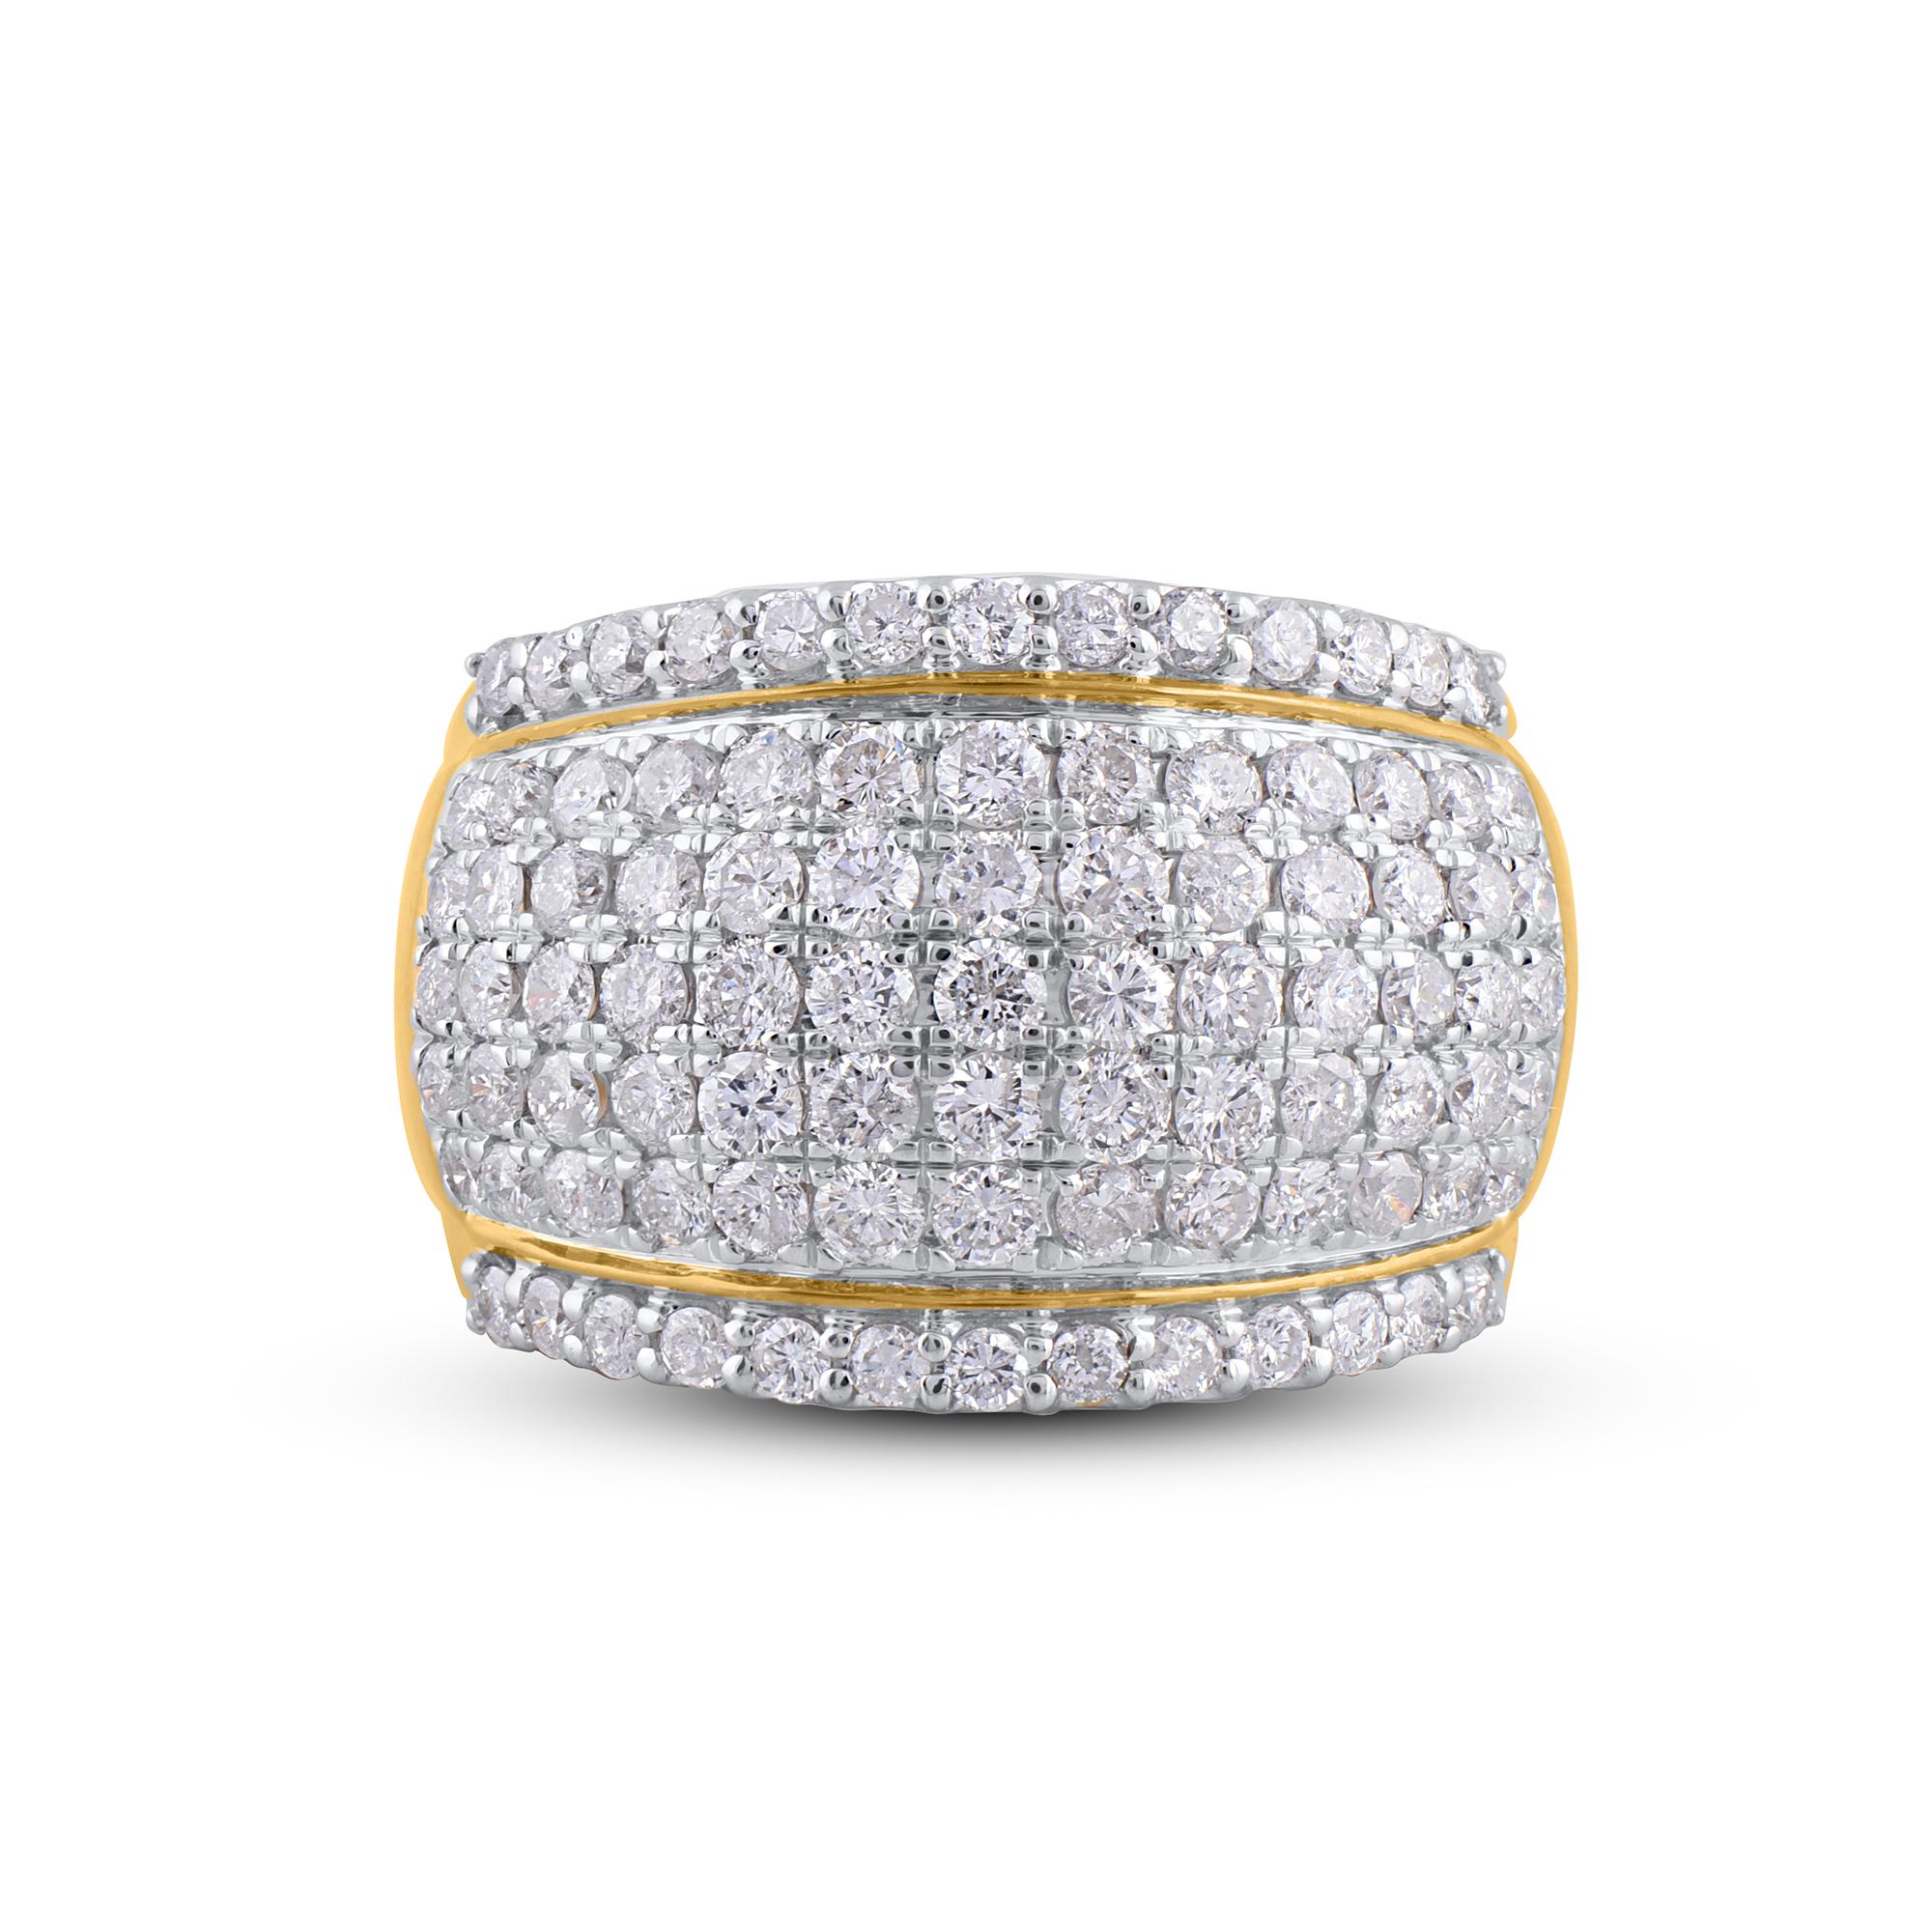 Classic and bold, this diamond ring will enhance her jewelry collection. Crafted in cool 14 Karat yellow gold and embellished with 91 round brilliant cut natural diamond in prong setting. The total diamond weight is 2.0 carat. The diamonds are